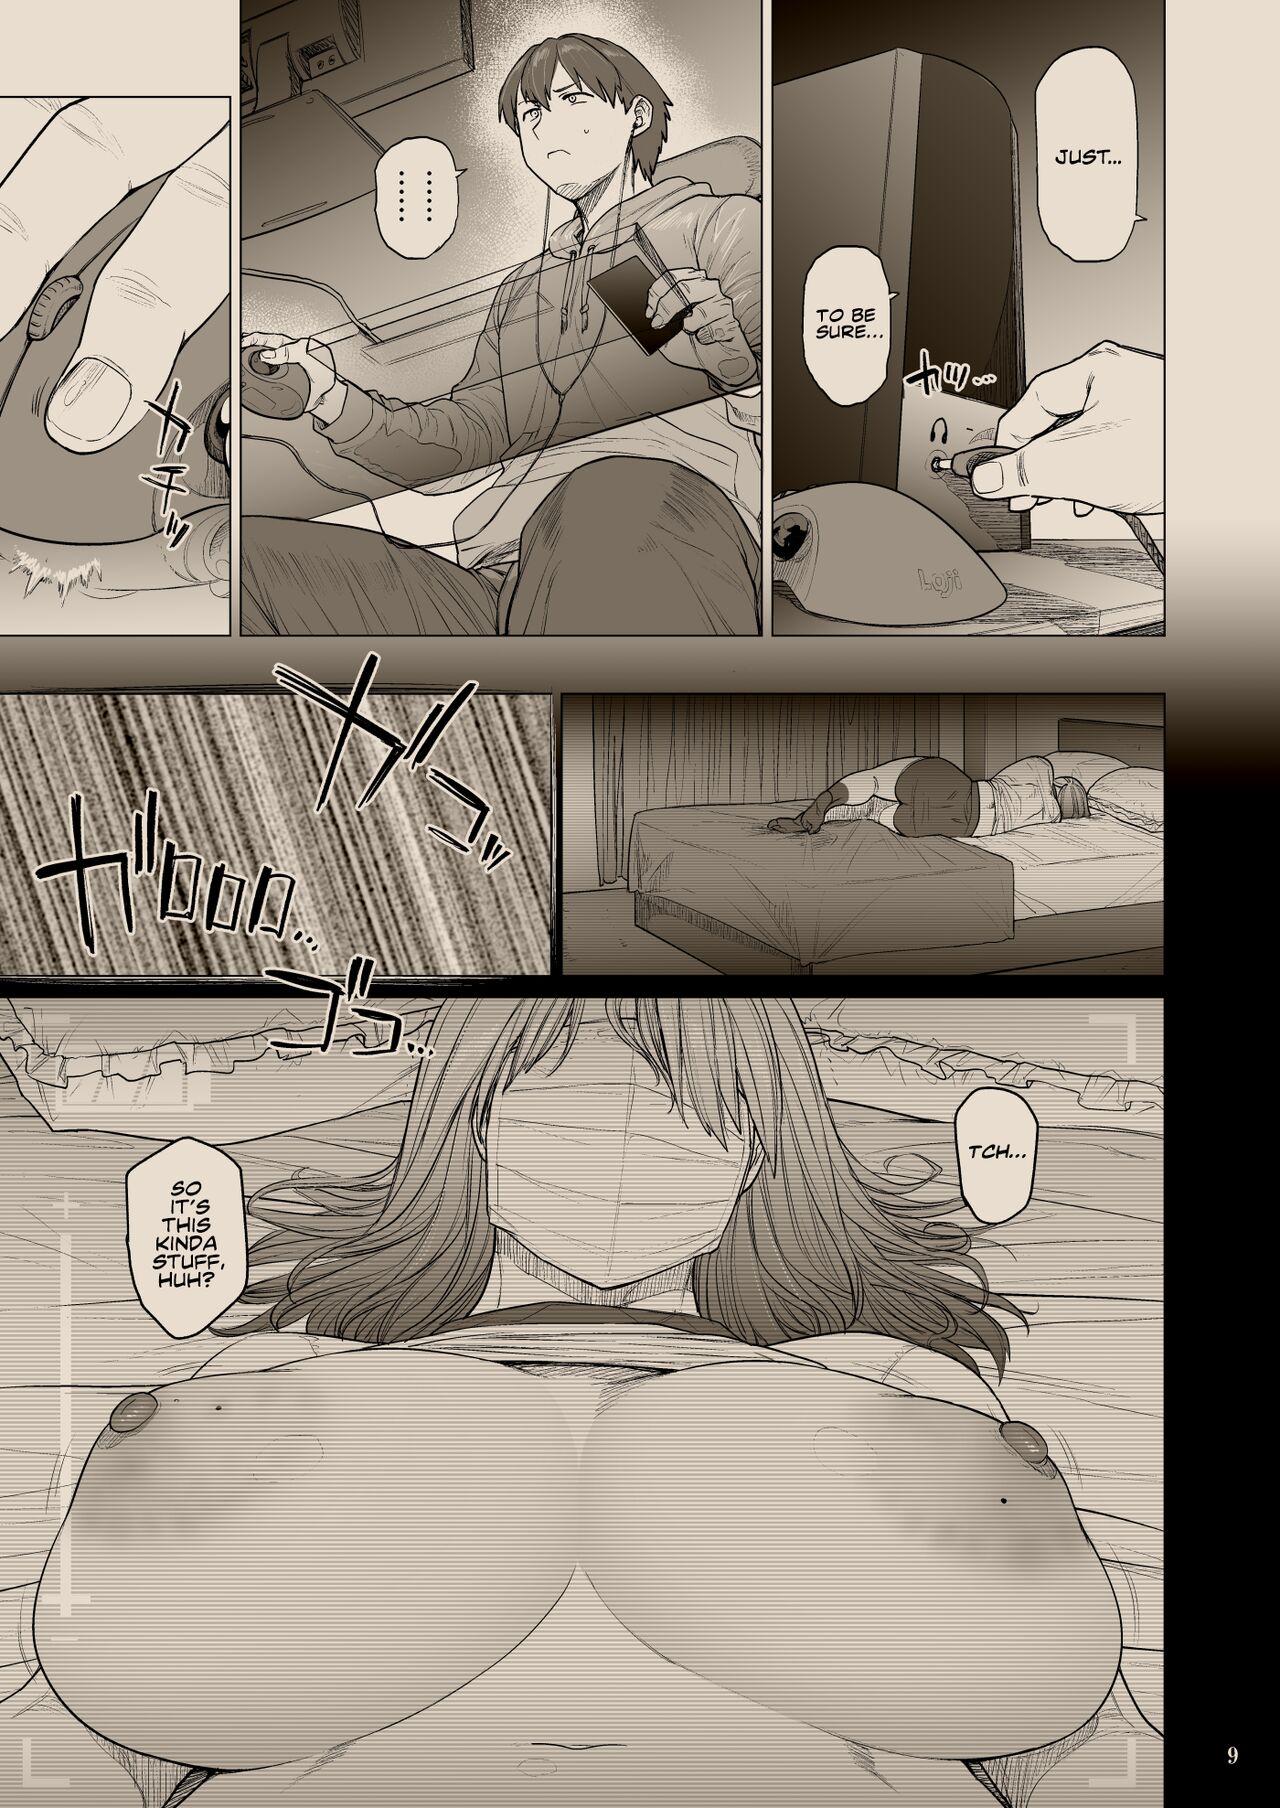 Blows B.S.S.² - My Smart, Beautiful Childhood Friend That I Loved First Became an Assistant of an Upperclassman’s Club and He Did Whatever He Pleased to Her - Original Amateur Cum - Page 8